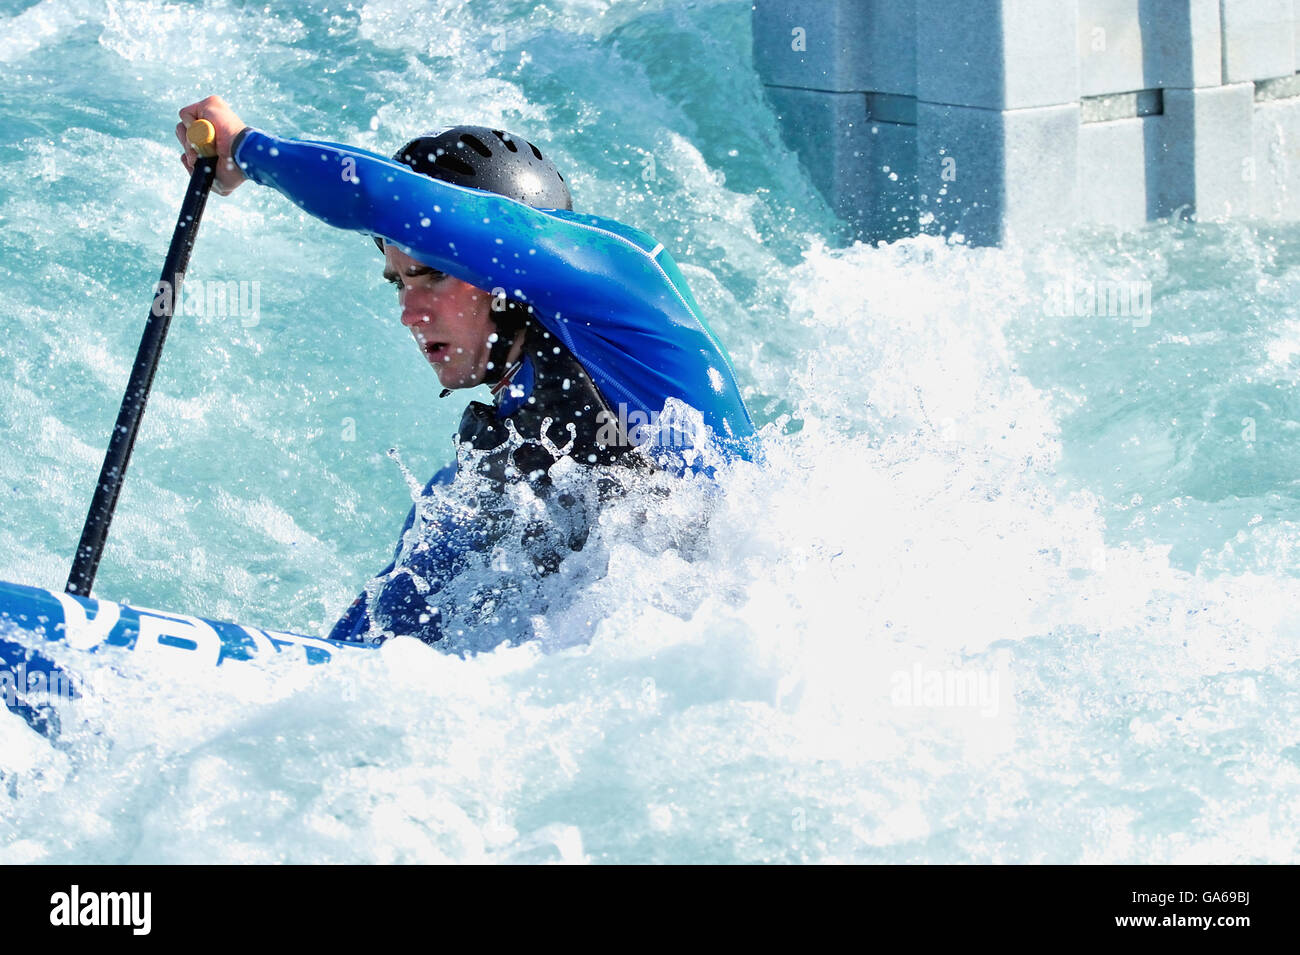 A canoeist at the 2012 Olympic White Water Centre on opening day, Lee Valley White Water Centre, Hertfordshire, England Stock Photo